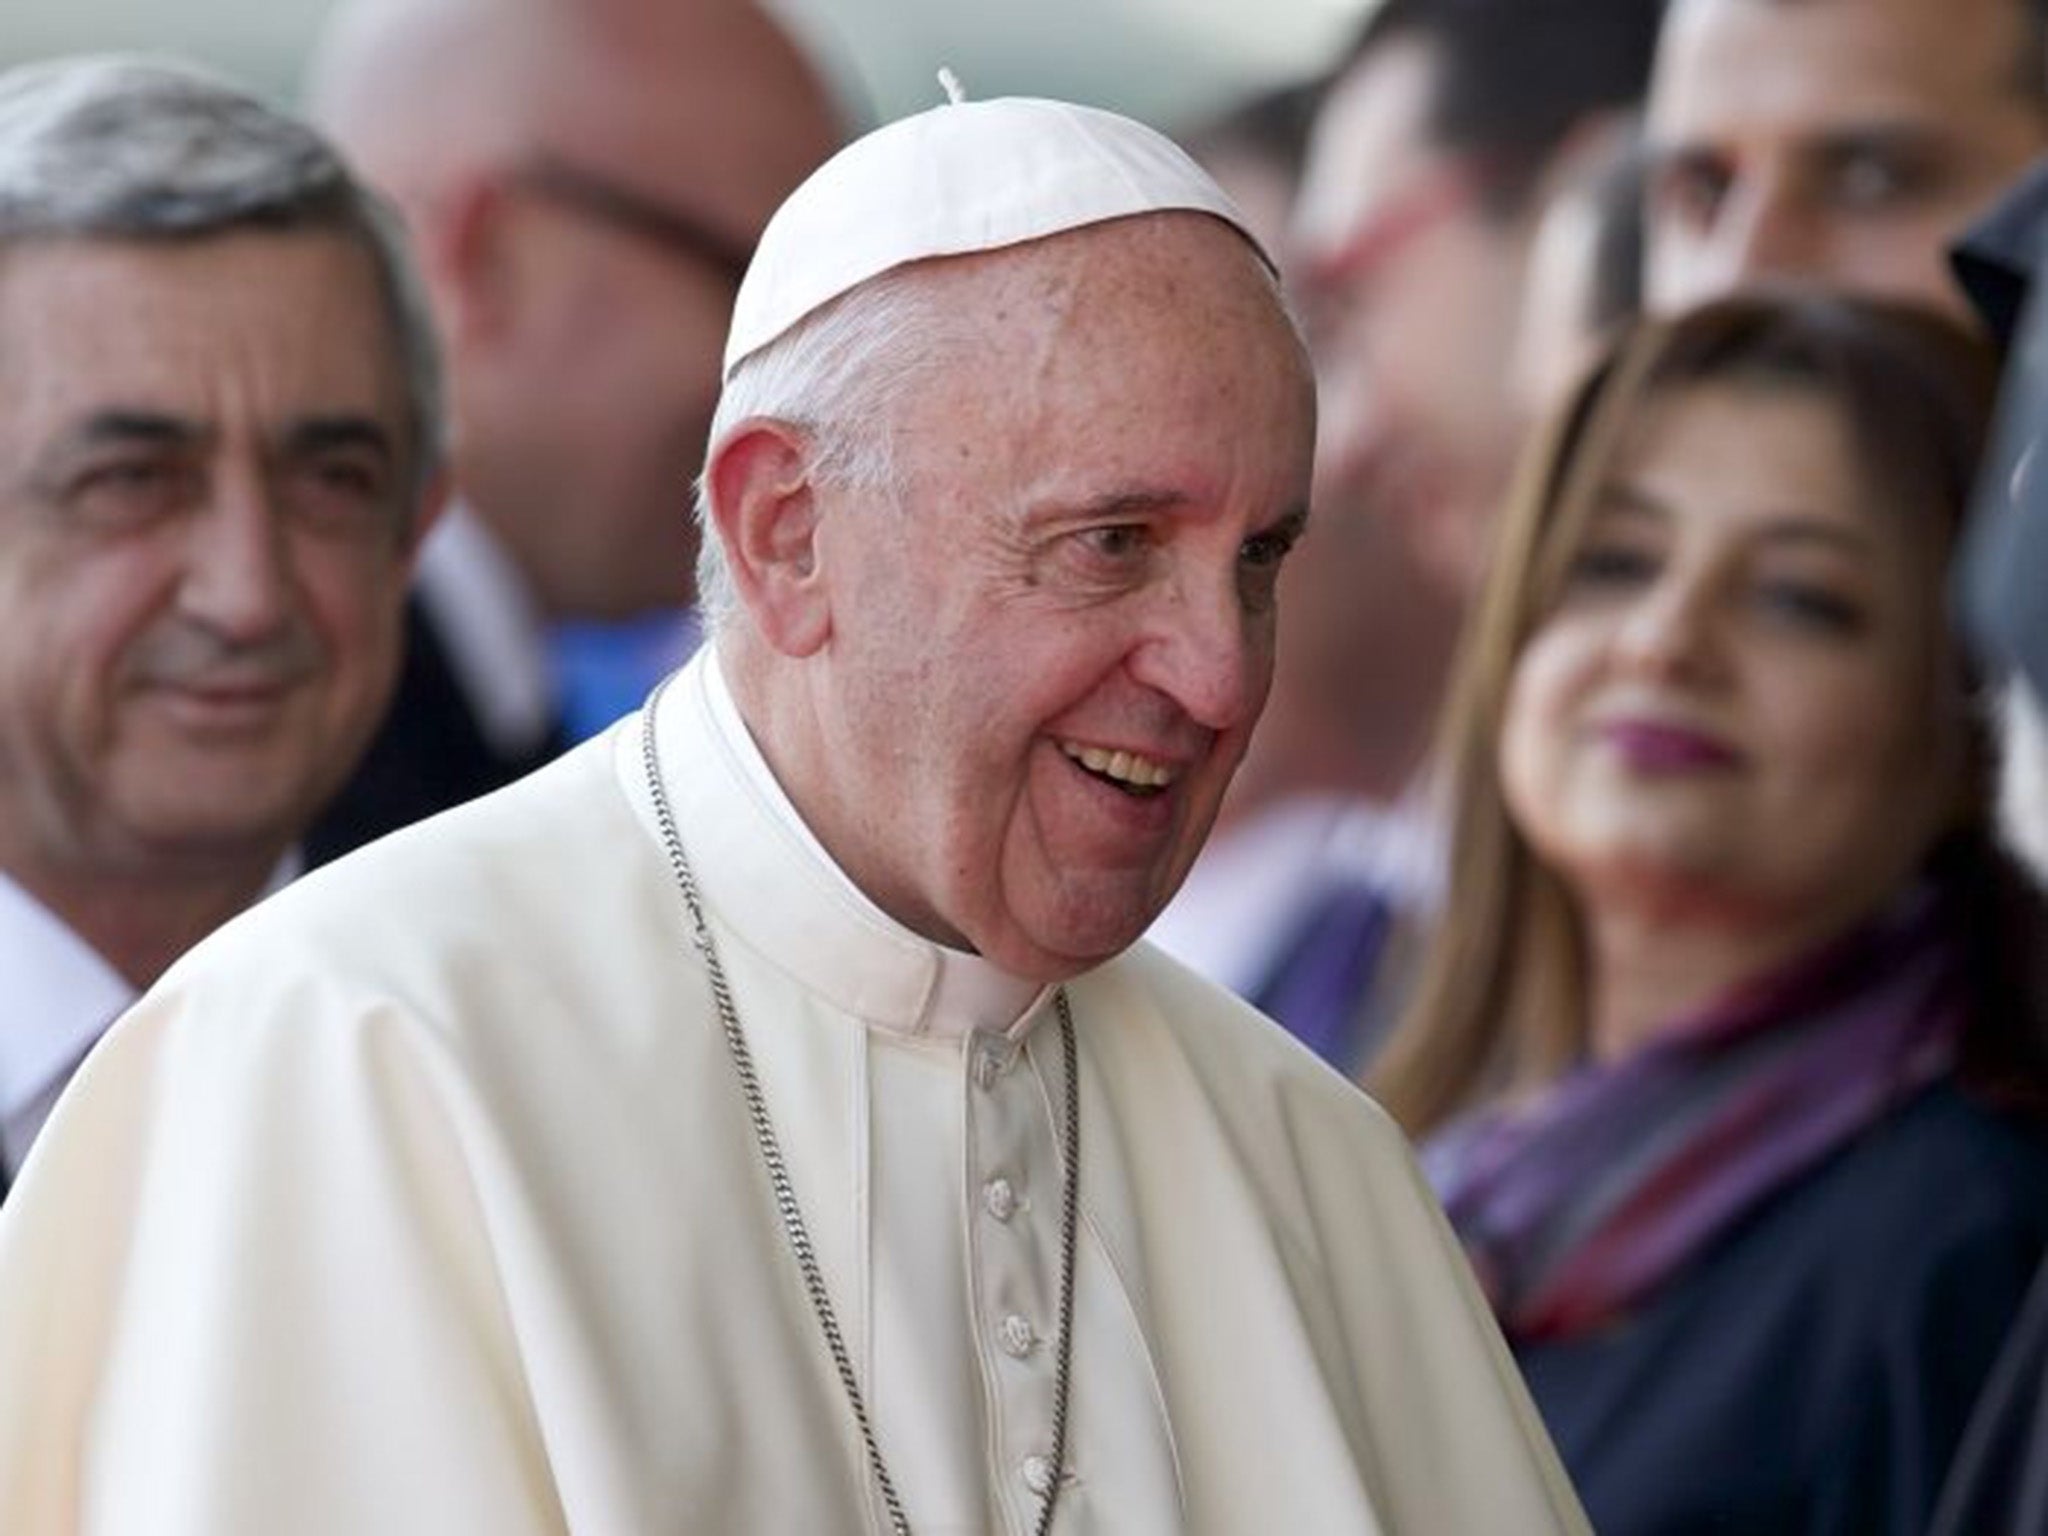 Pope Francis used the Armenian term for the genocide, 'Medz Yeghern', or 'the Great Evil' during his visit to Armenia